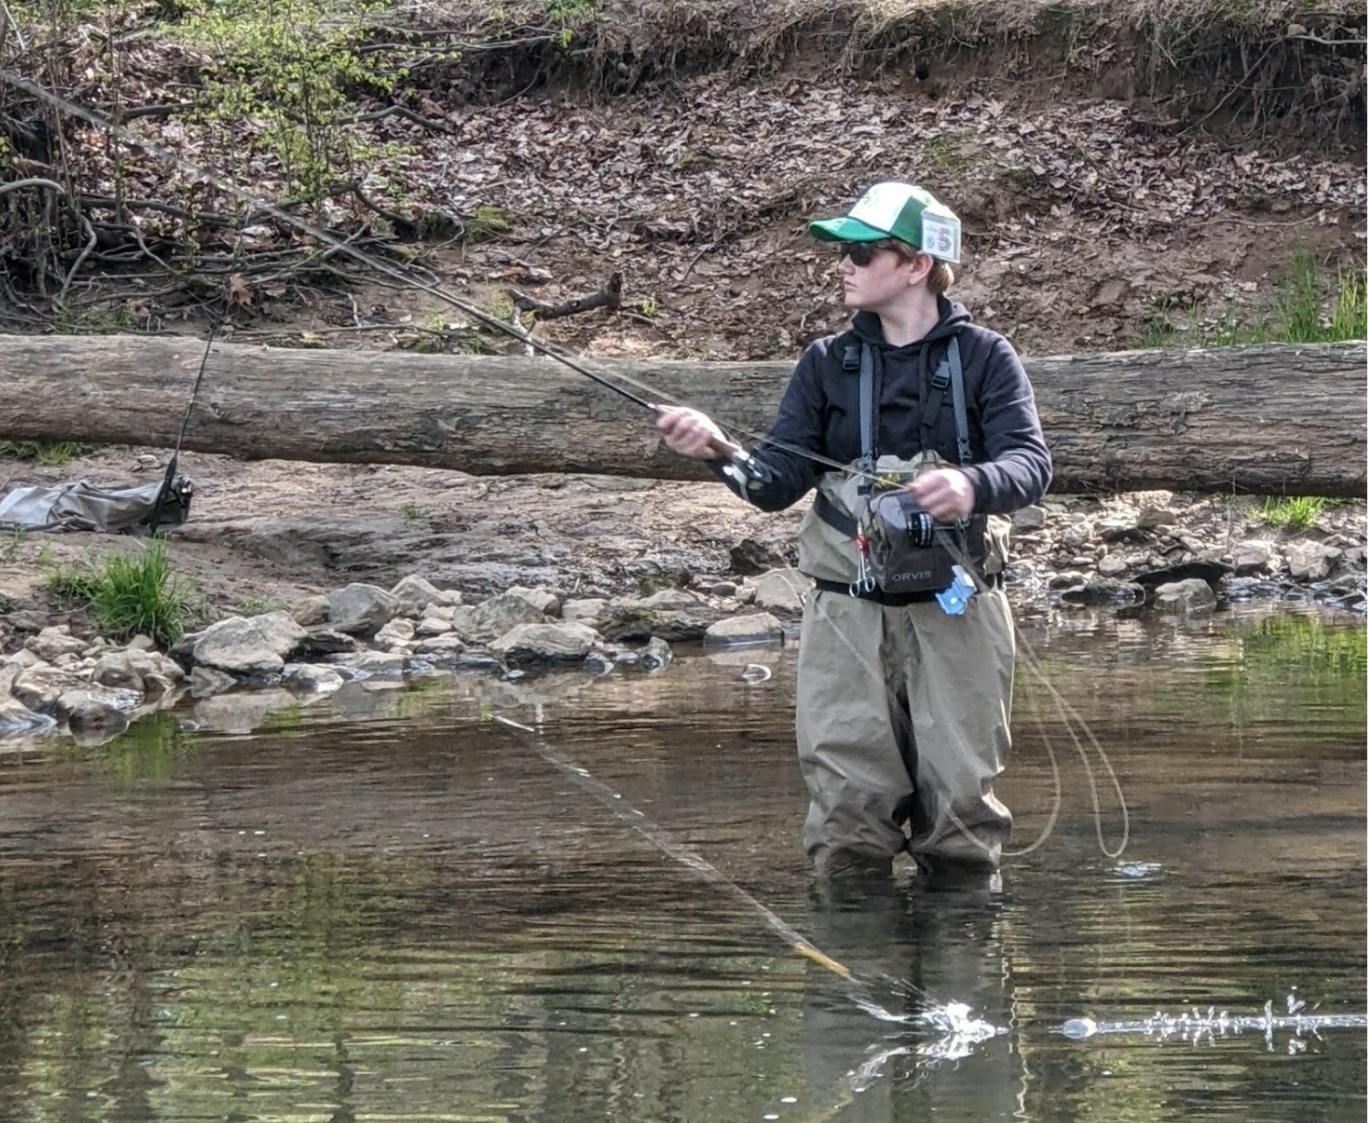 A young angler using the Orvis Clearwater LA II Fly Reel while wading in a river.